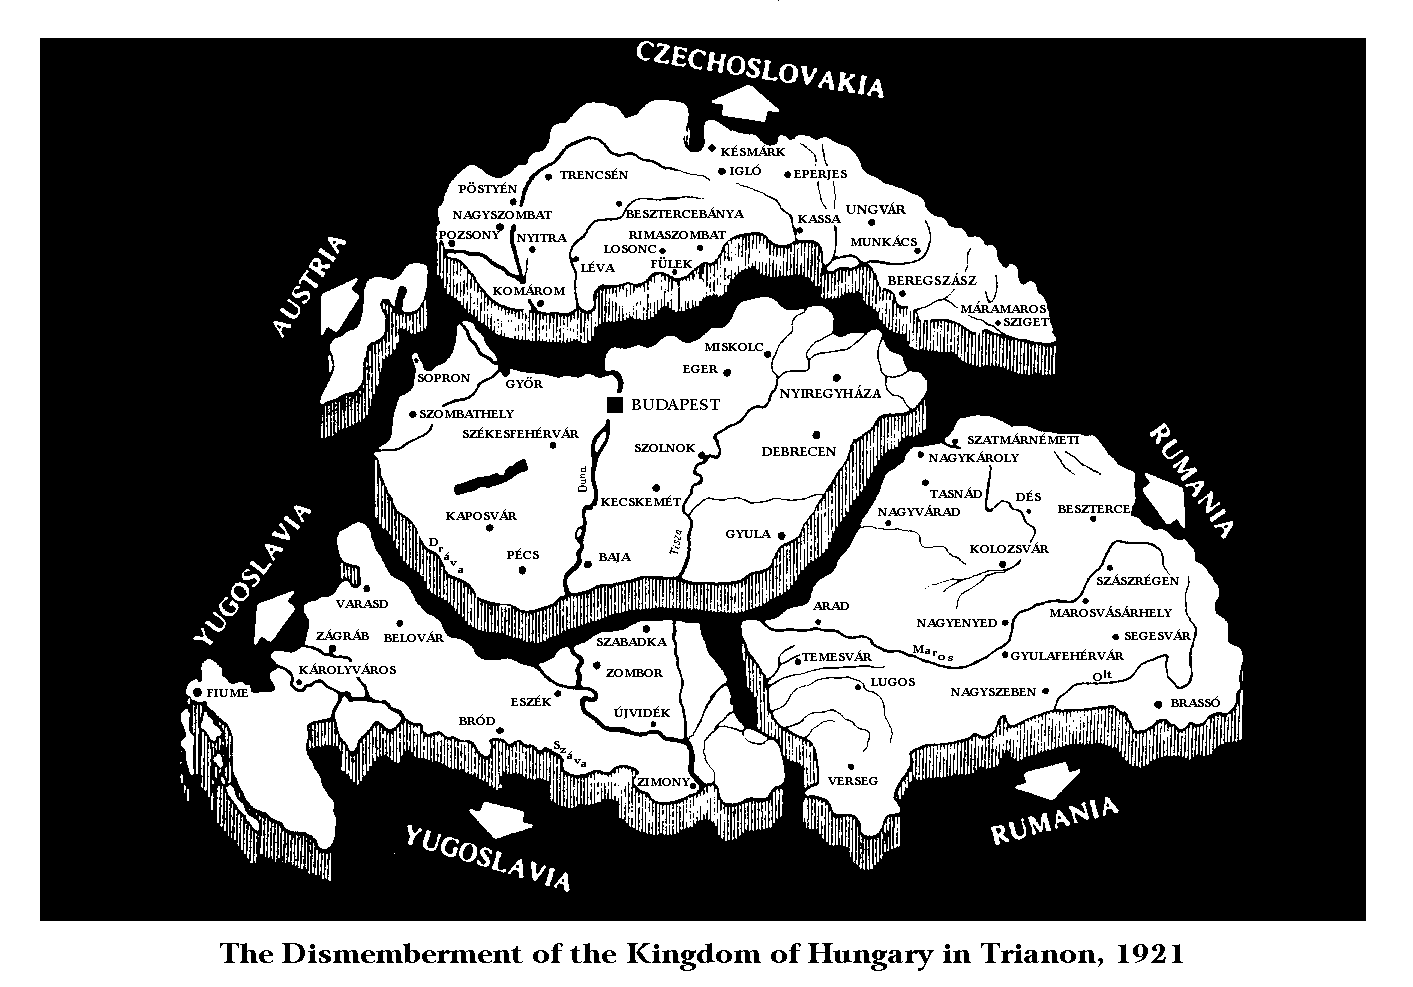 After 1918 Trianon Treaty